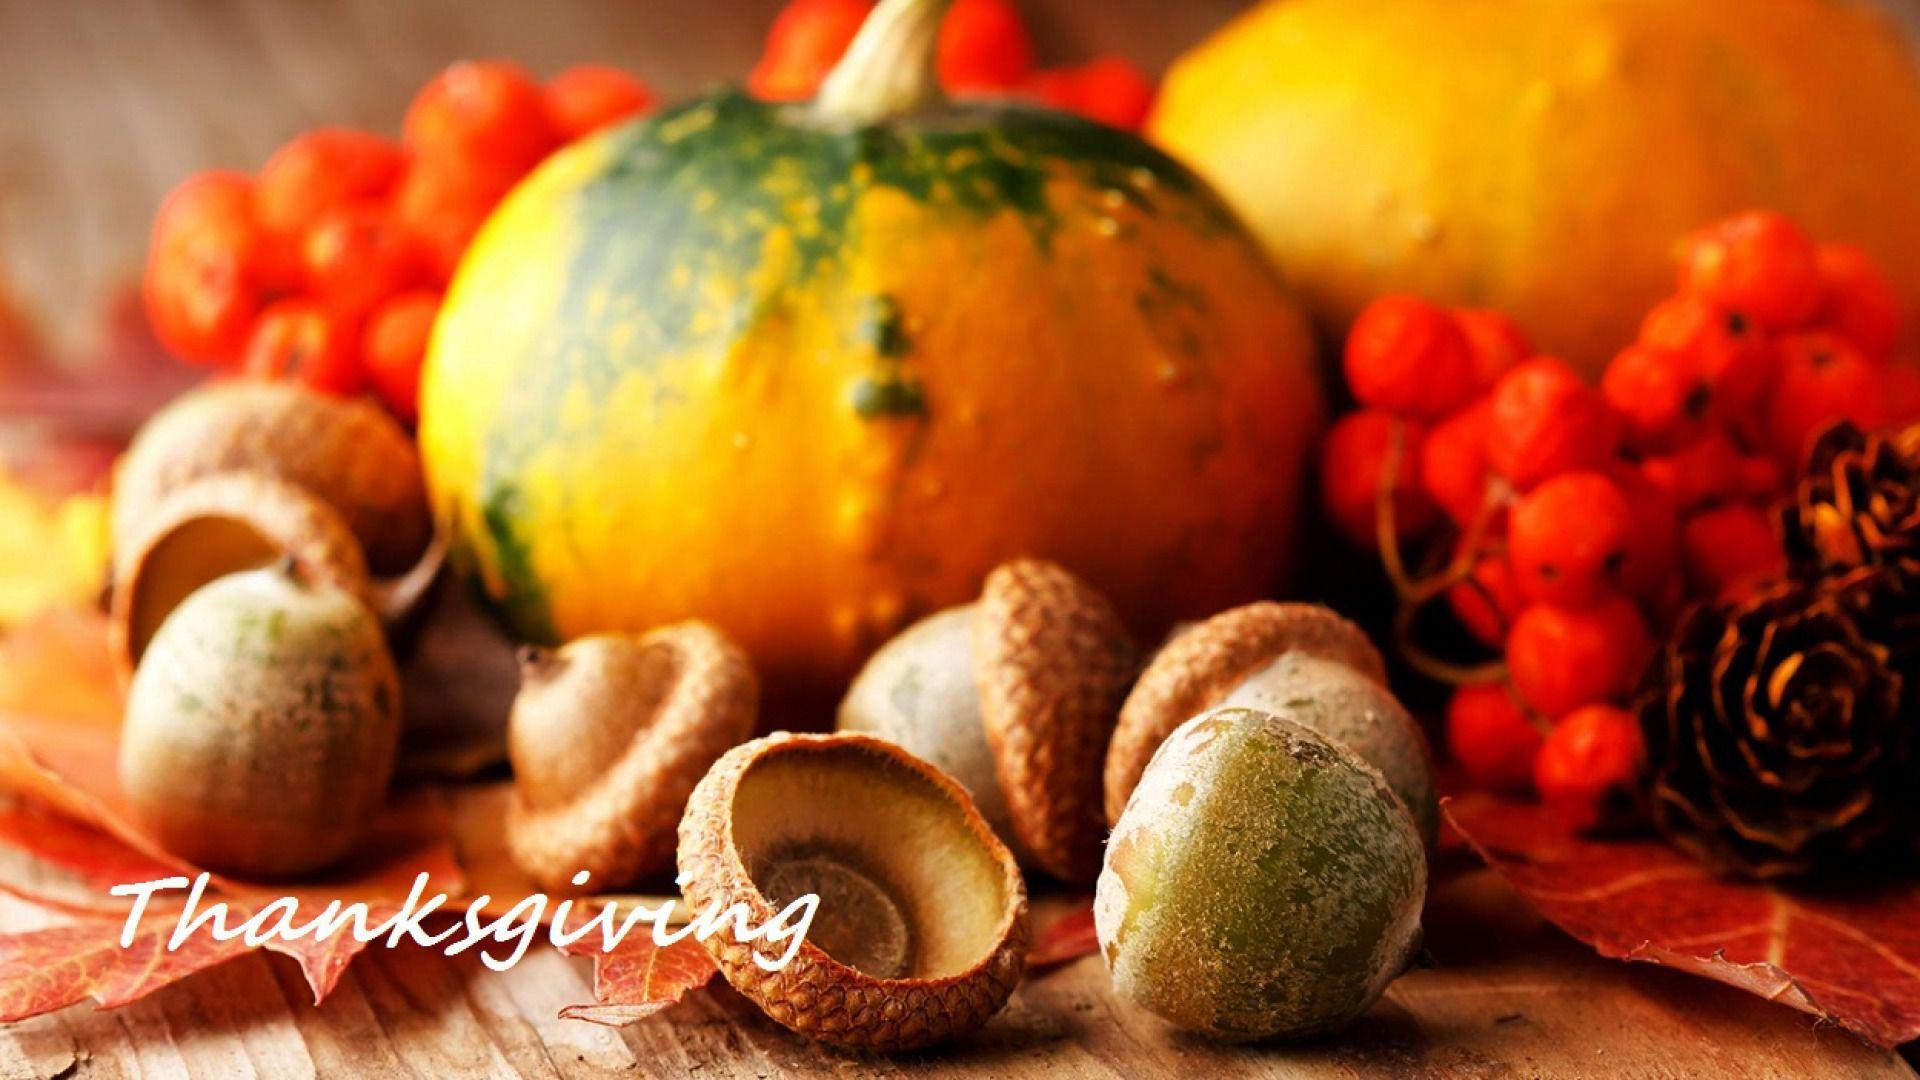 13 Free Thanksgiving Wallpapers and Backgrounds